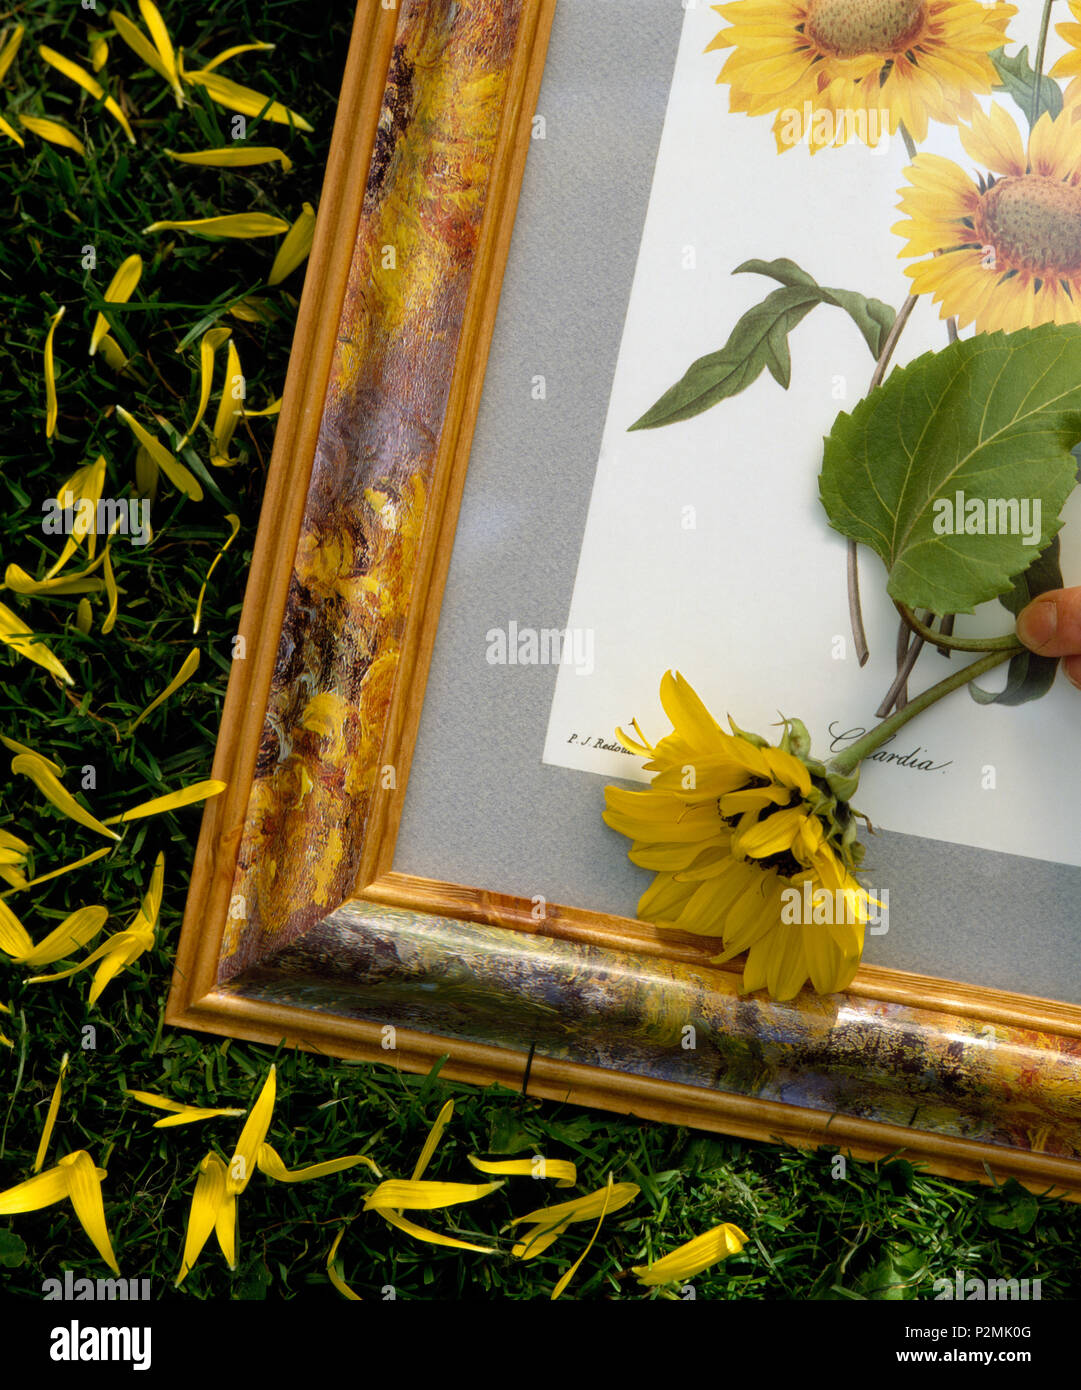 Close-up of sunflower on framed sunflower picture Stock Photo